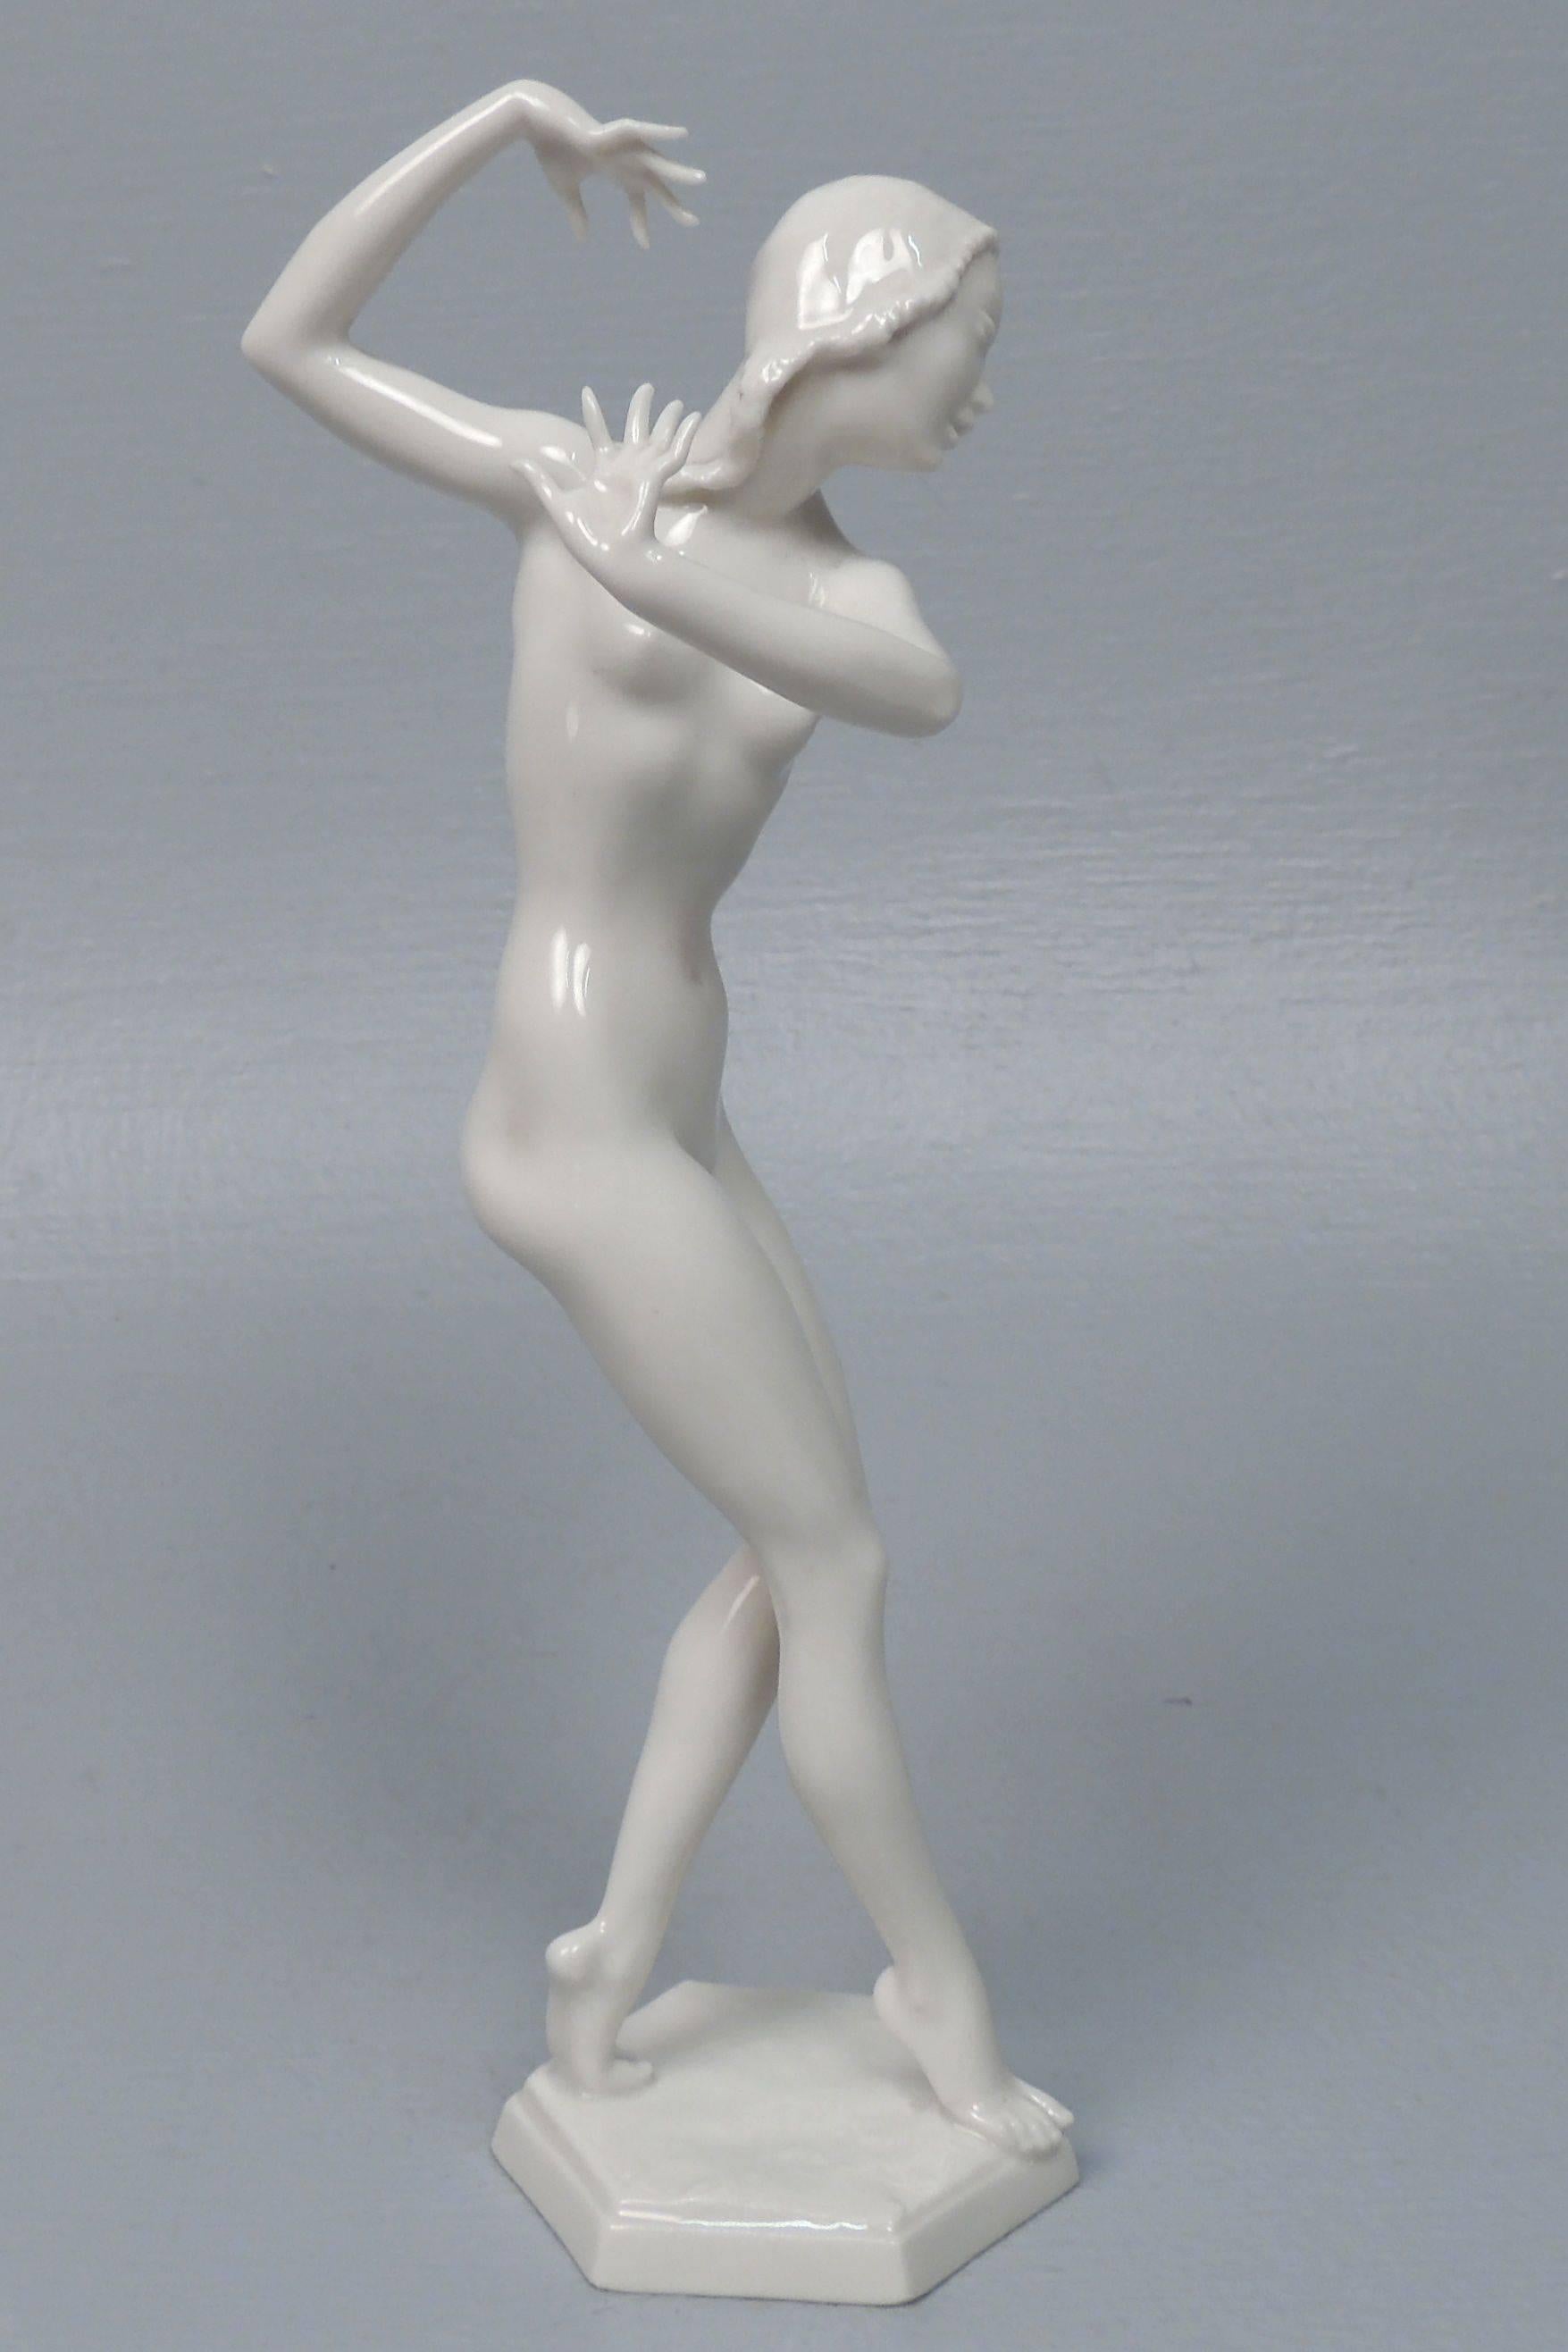 A stylized Art Deco female nude figure by Carl Werner for Hutschenreuther porcelain. 

Dynamically modeled with arms and fingers outstretched. 

Height: circa 8 3/4 in.

Items purchased from David Sterner Antiques must delight you. Purchases